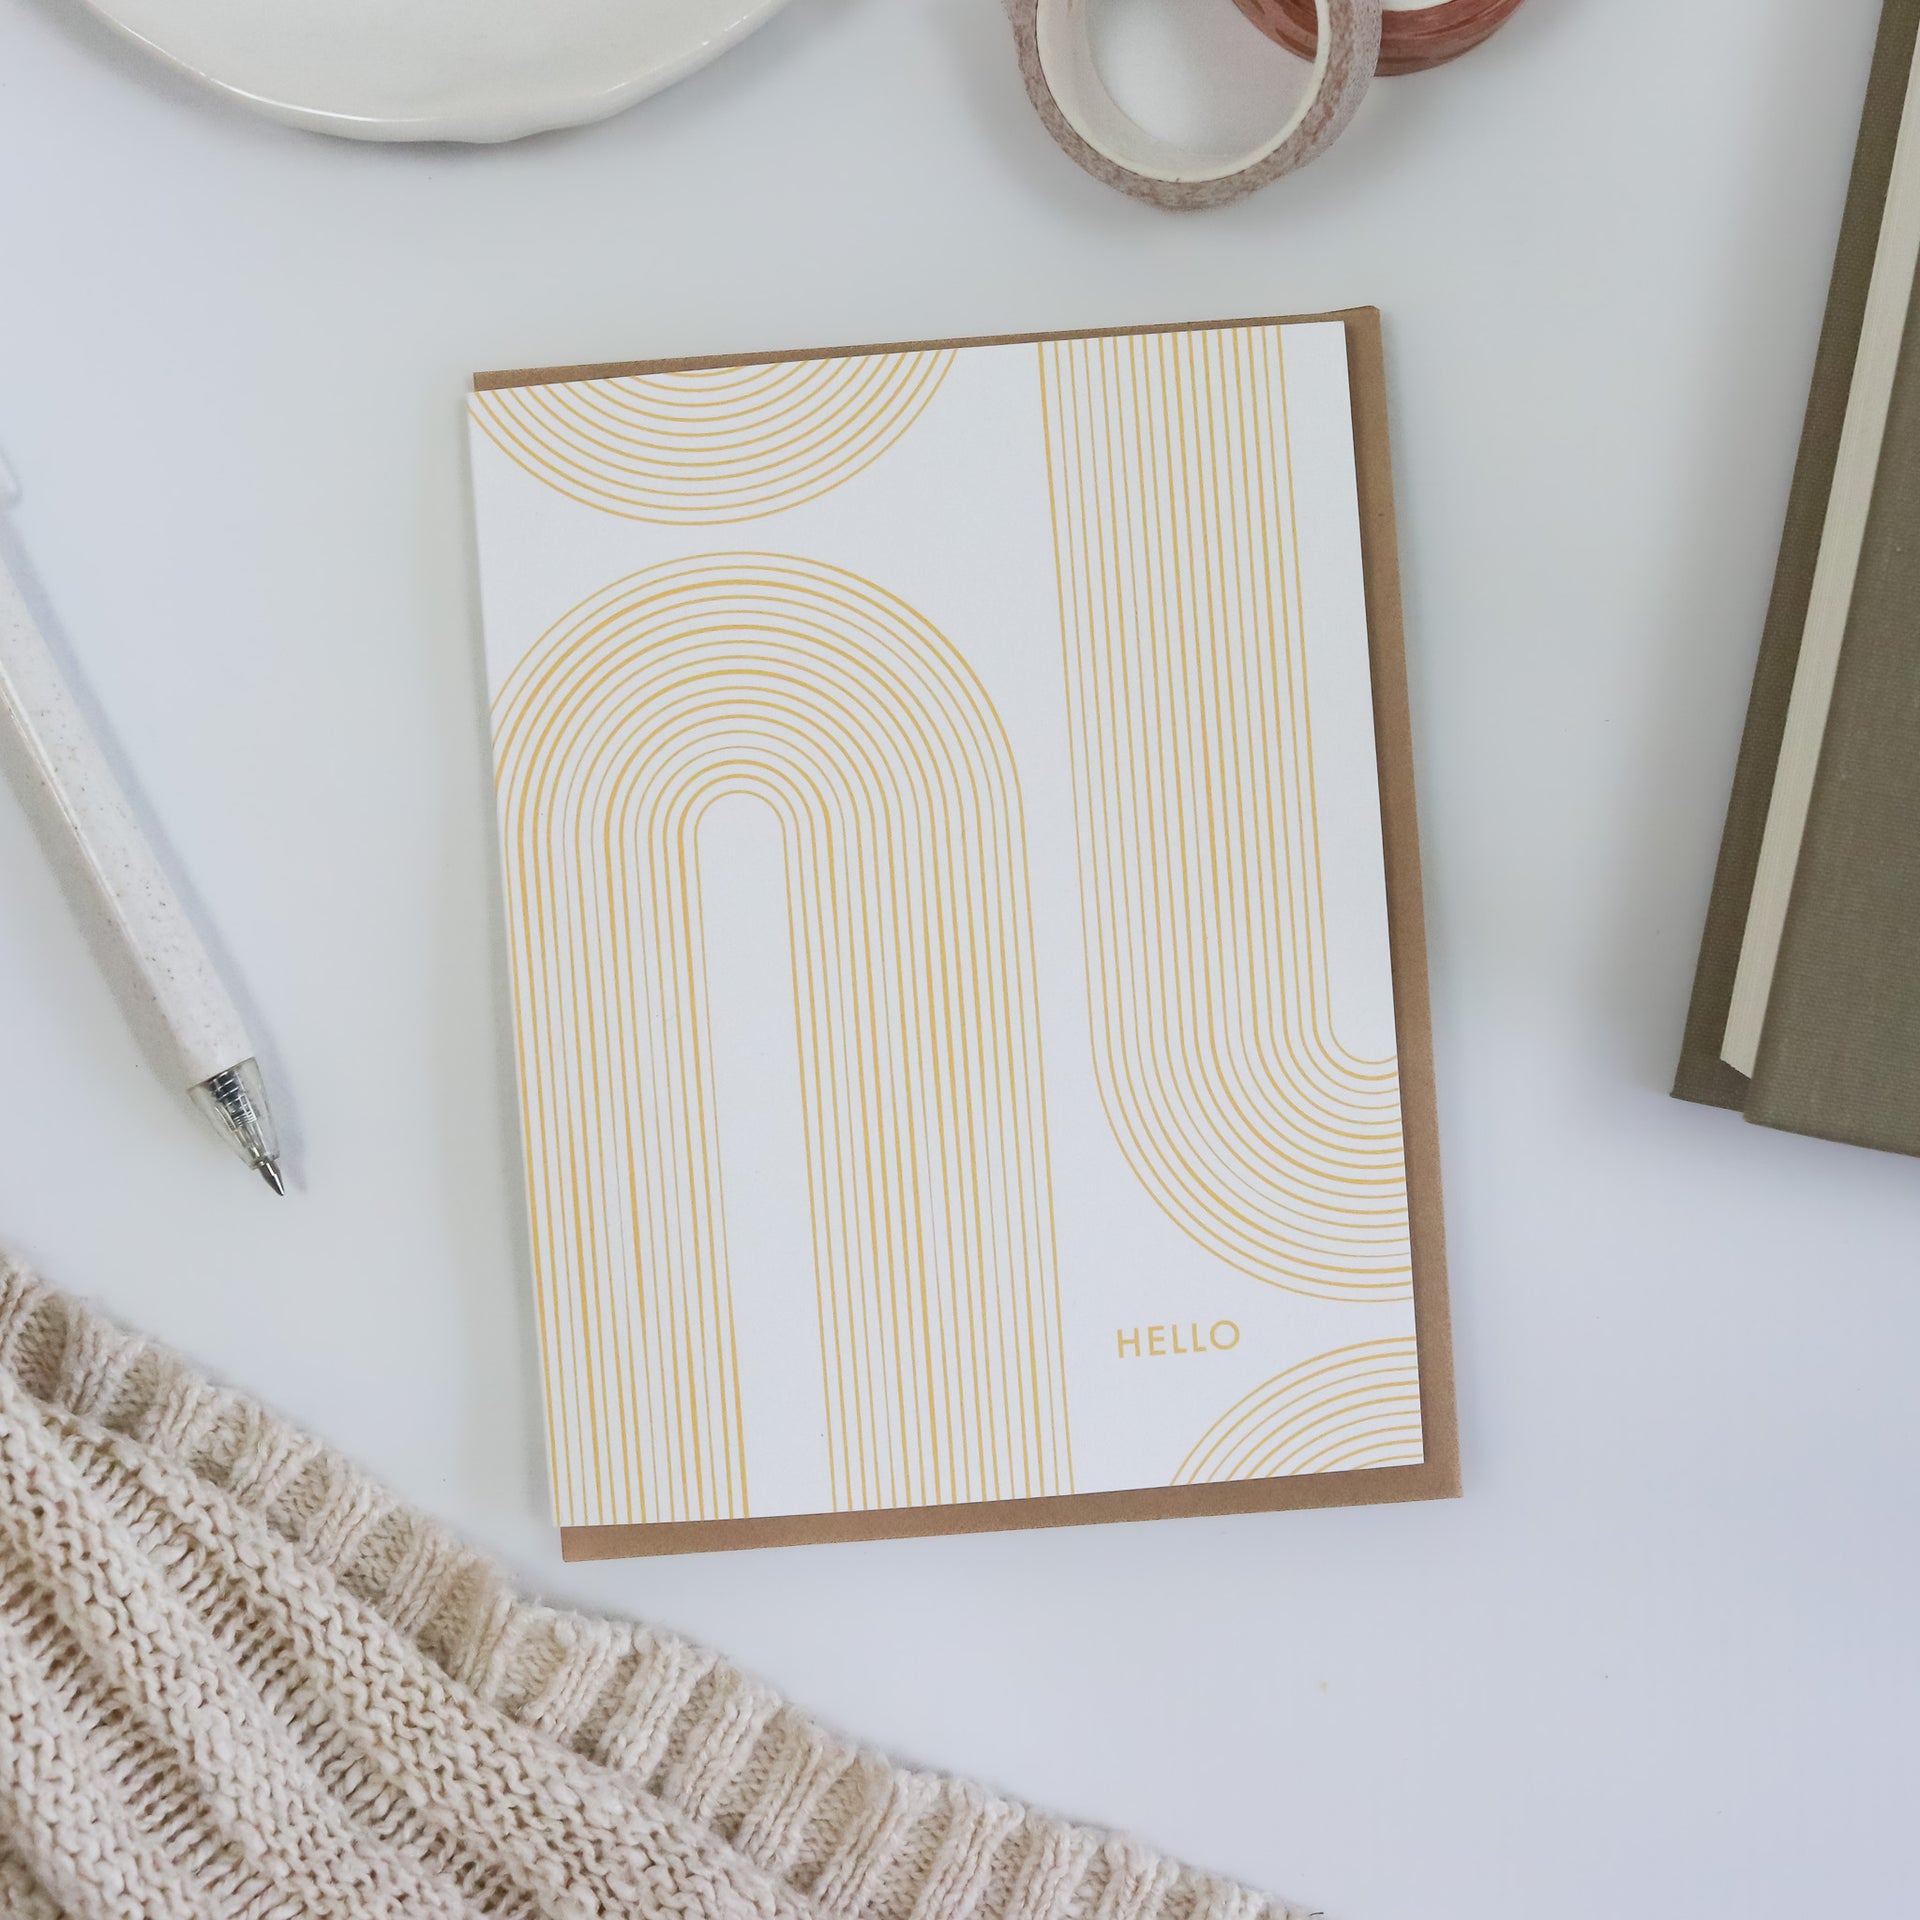 Hello Arches Everyday Encouragement Card | Overflow & Co.